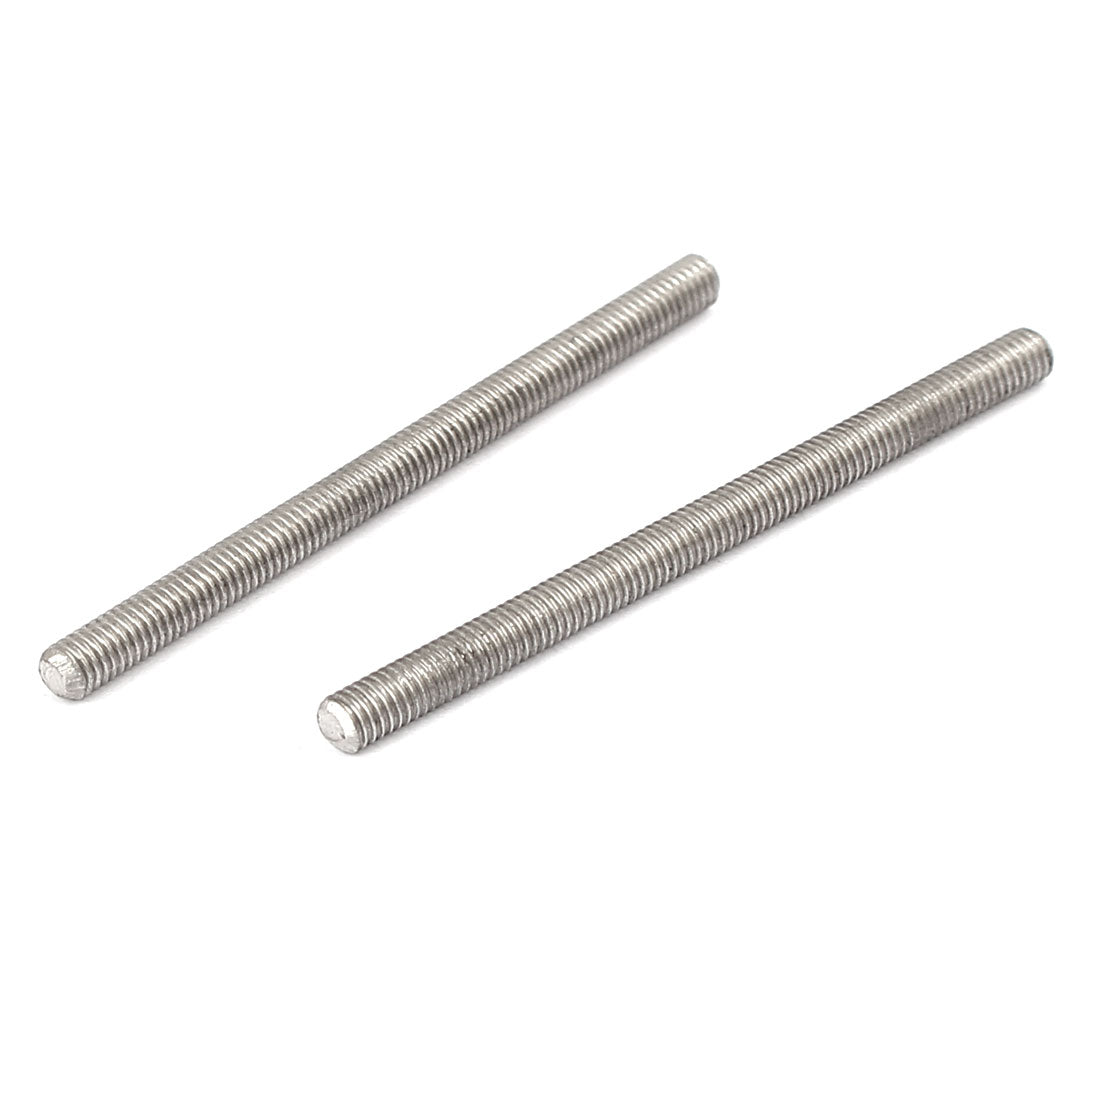 uxcell Uxcell M3 x 45mm 304 Stainless Steel Fully Threaded Rods Bar Studs Fasteners 20 Pcs